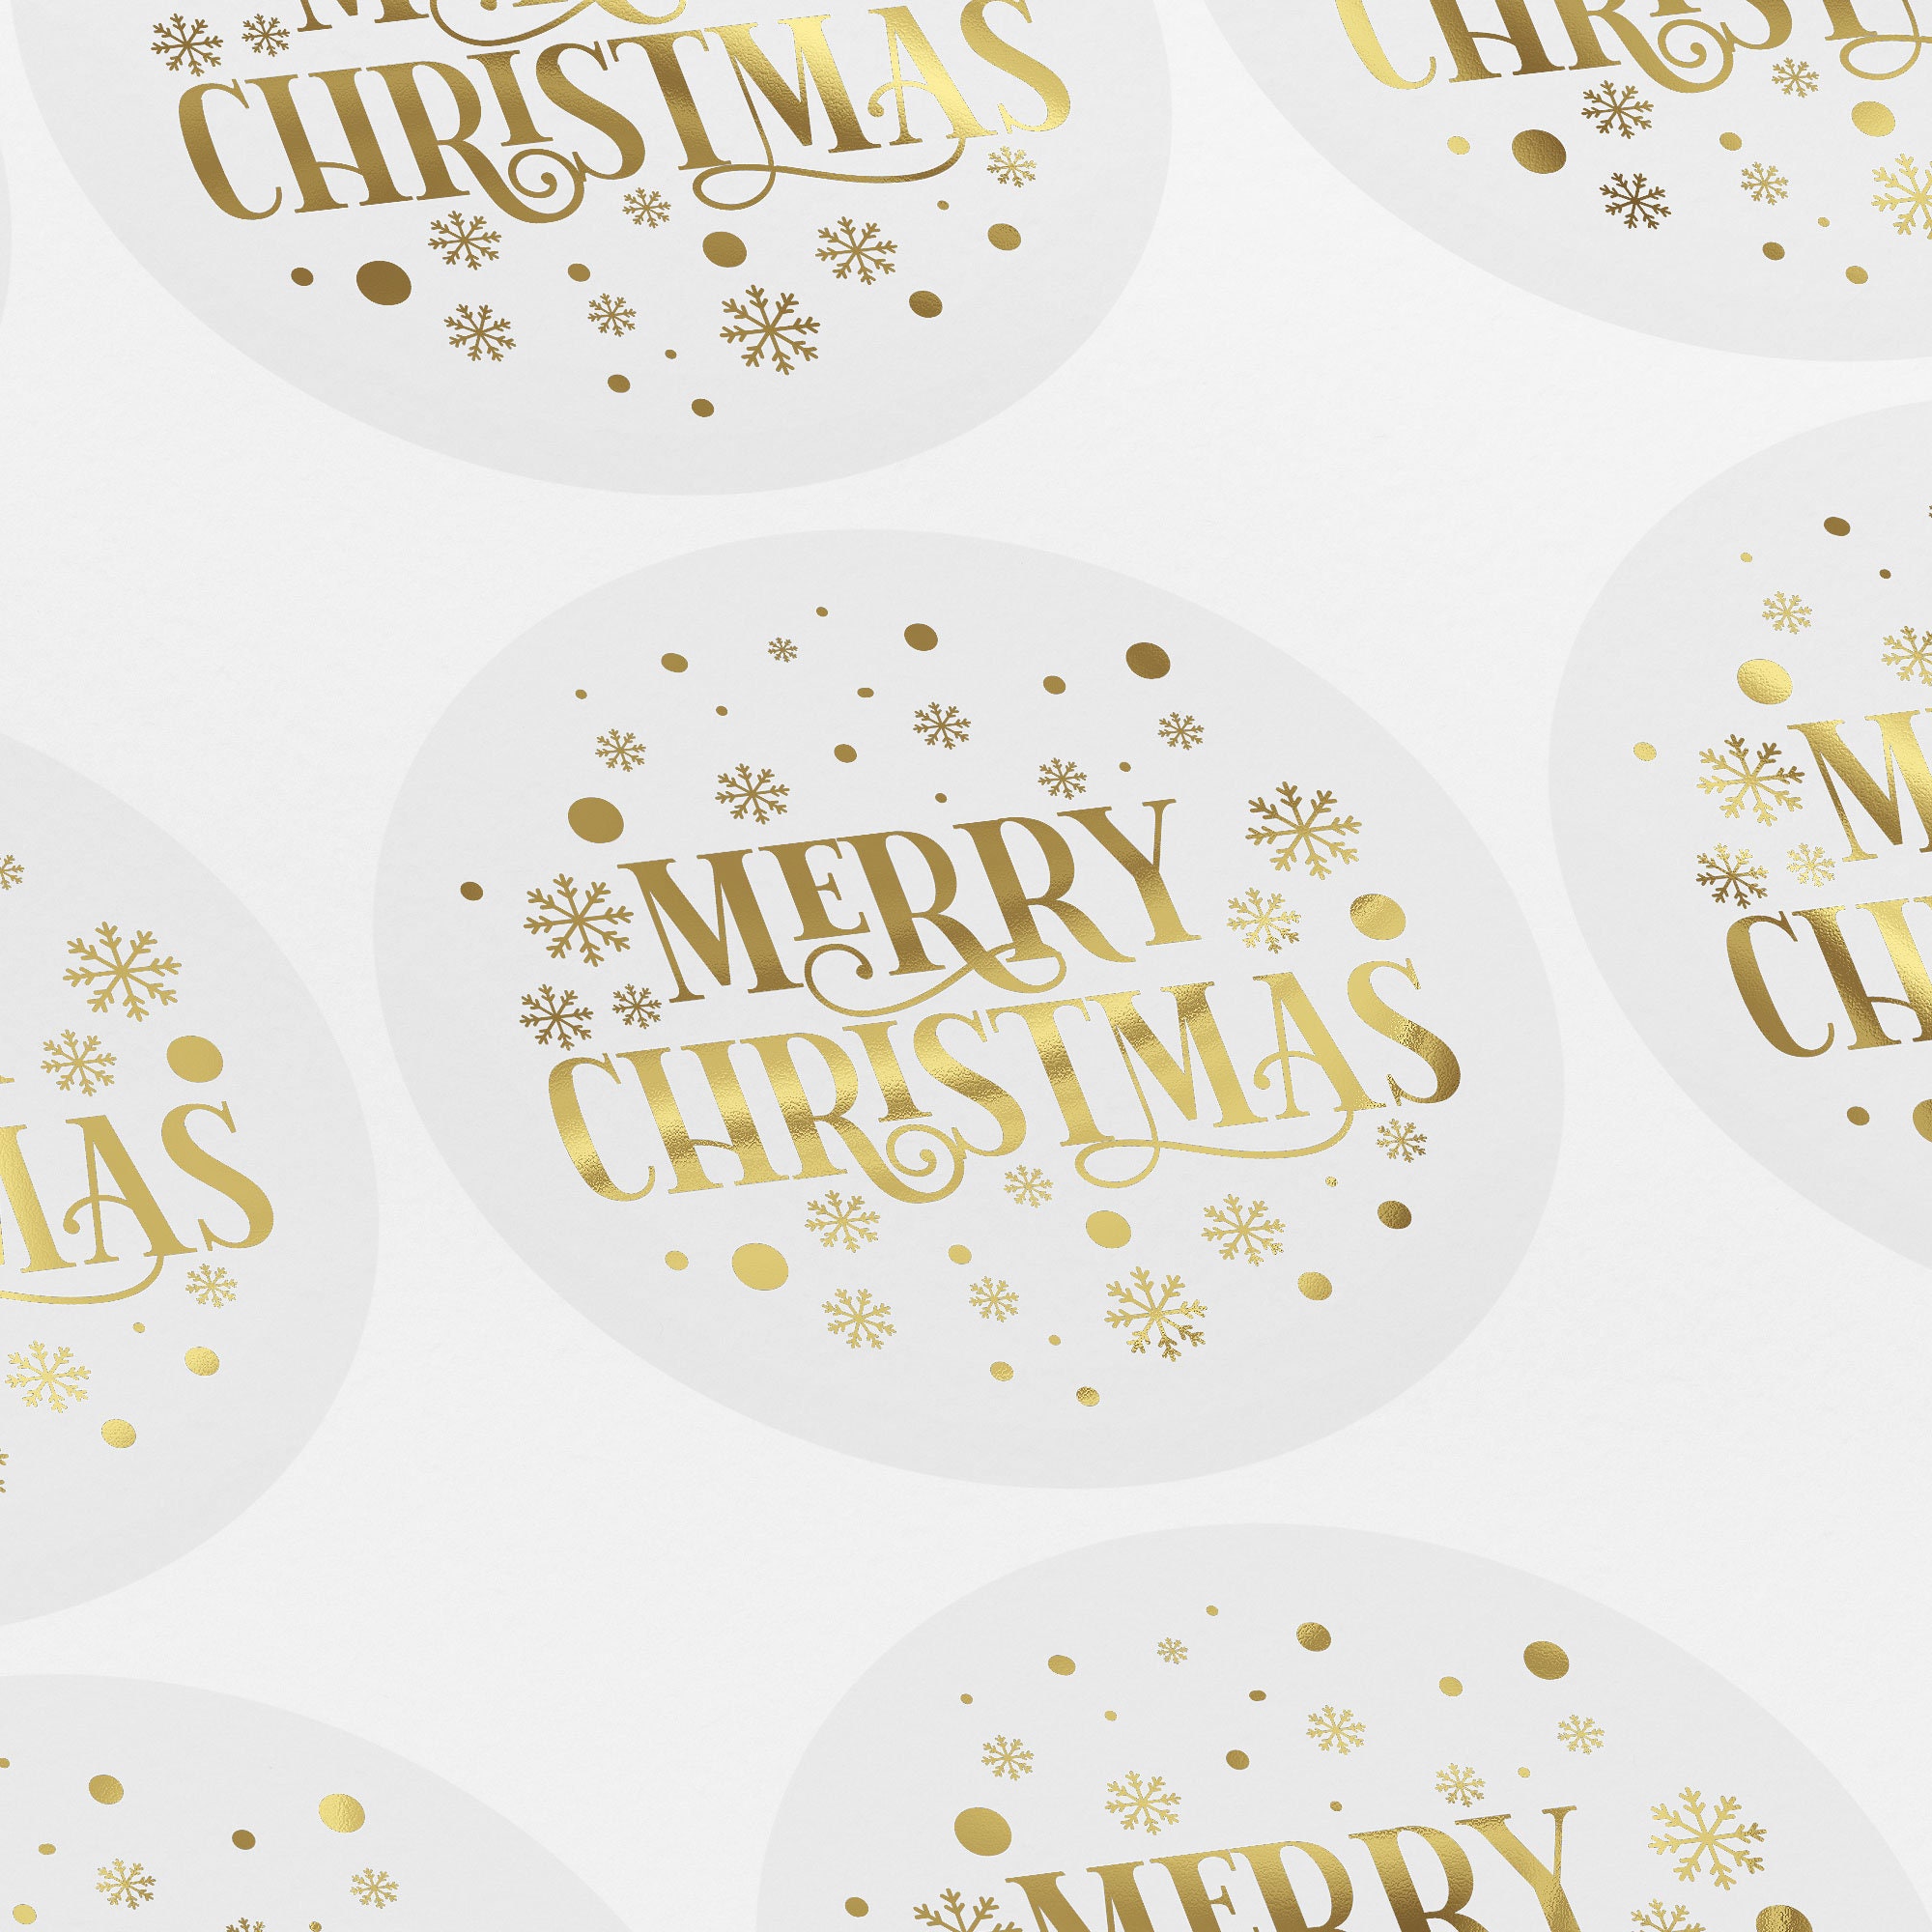 Gold Embossed Stickers Christmas Envelope Seals for Wedding Invitations 1 3/4 inch - Christmas Metallic Foil Package Envelope Certificate Wafer Seals